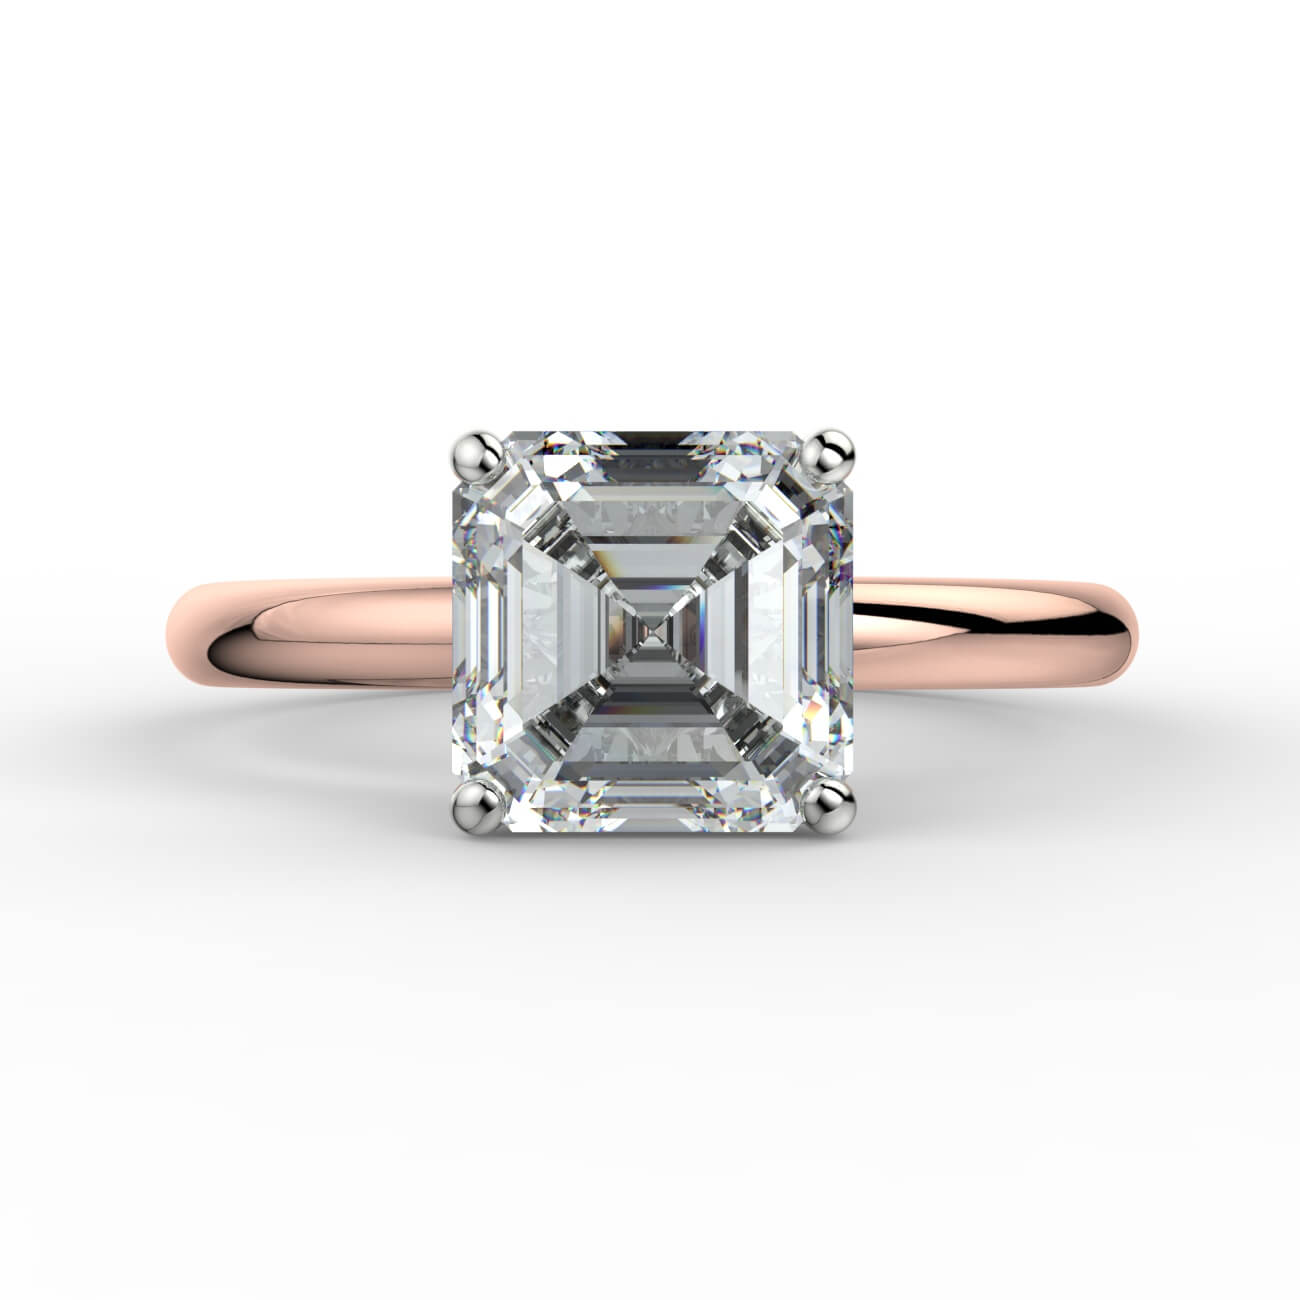 Comfort fit 4 claw asscher cut solitaire diamond ring in white and rose gold – Australian Diamond Network